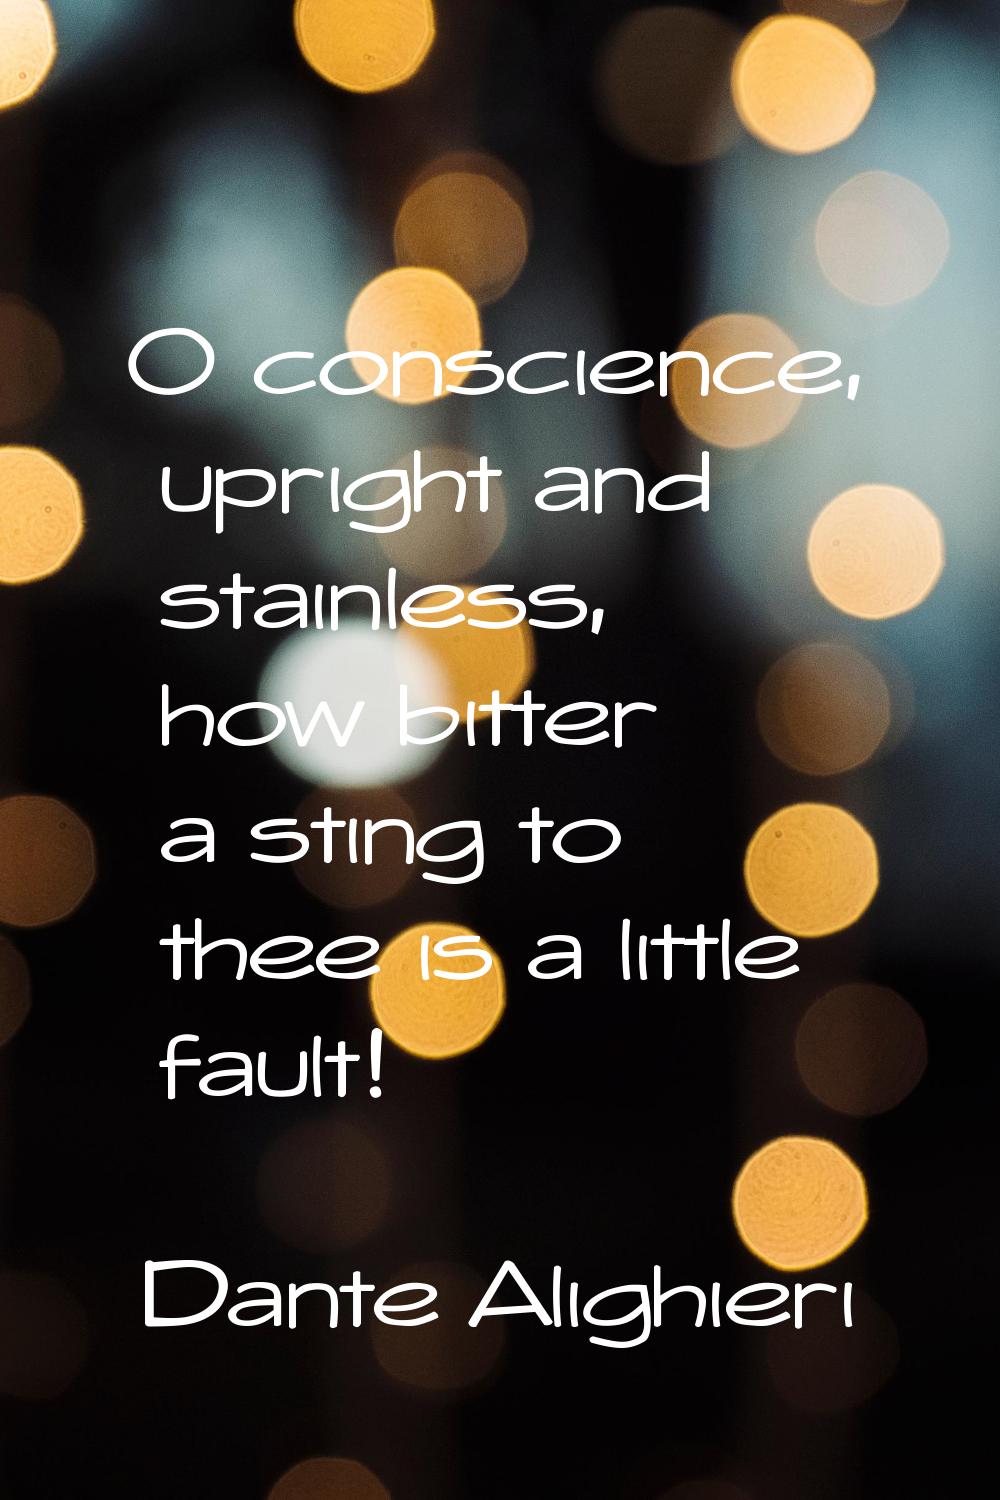 O conscience, upright and stainless, how bitter a sting to thee is a little fault!